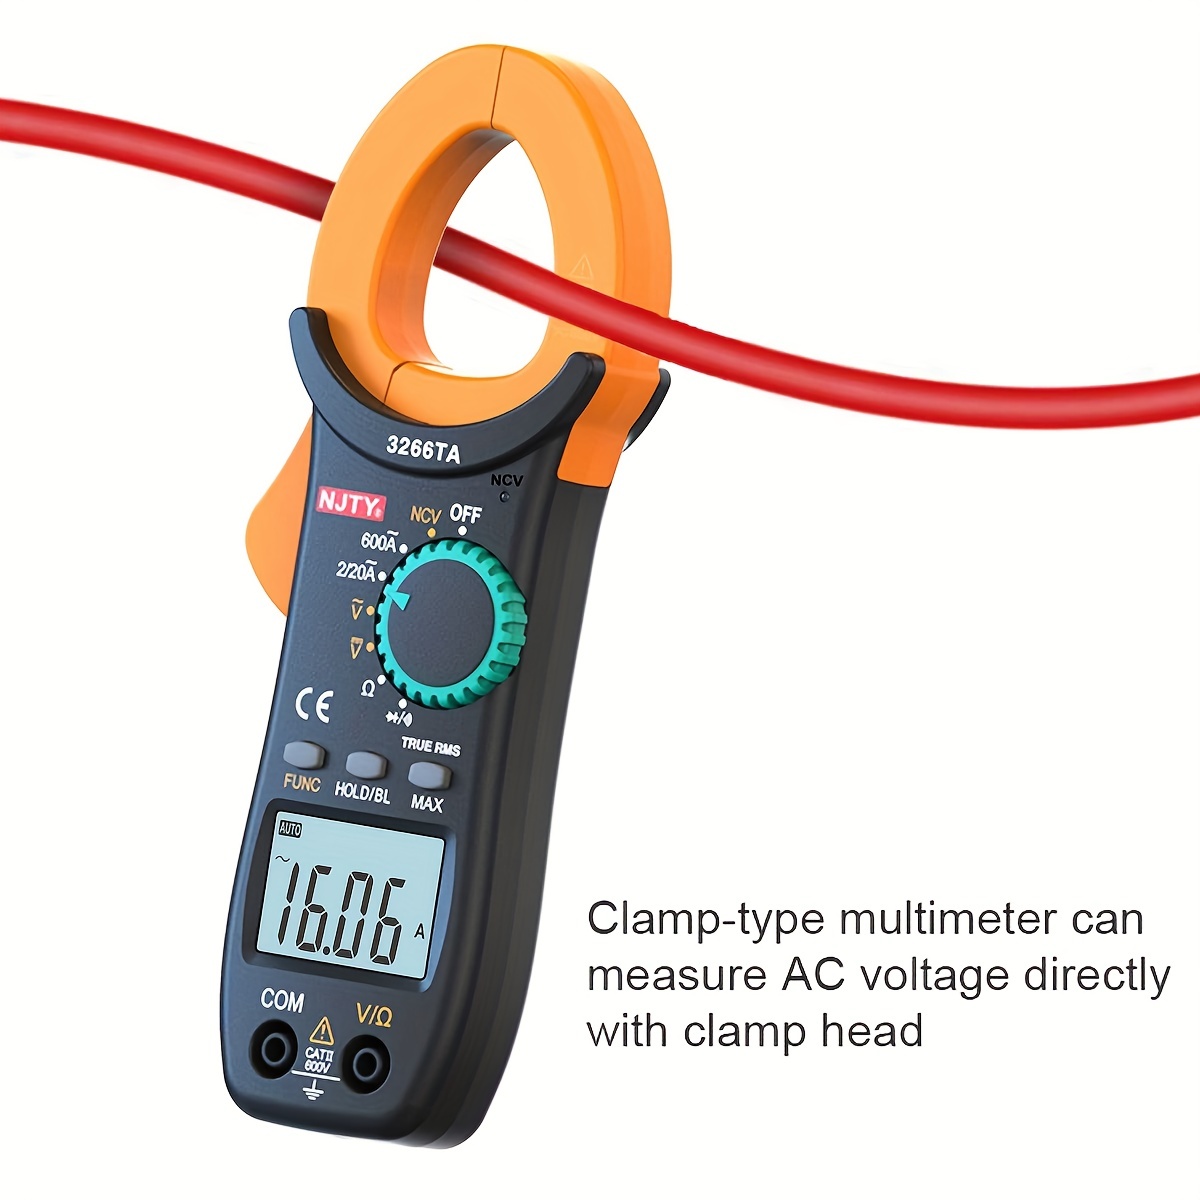 digital clamp meter tester trms 2000 counts auto ranging measures current voltage resistance more